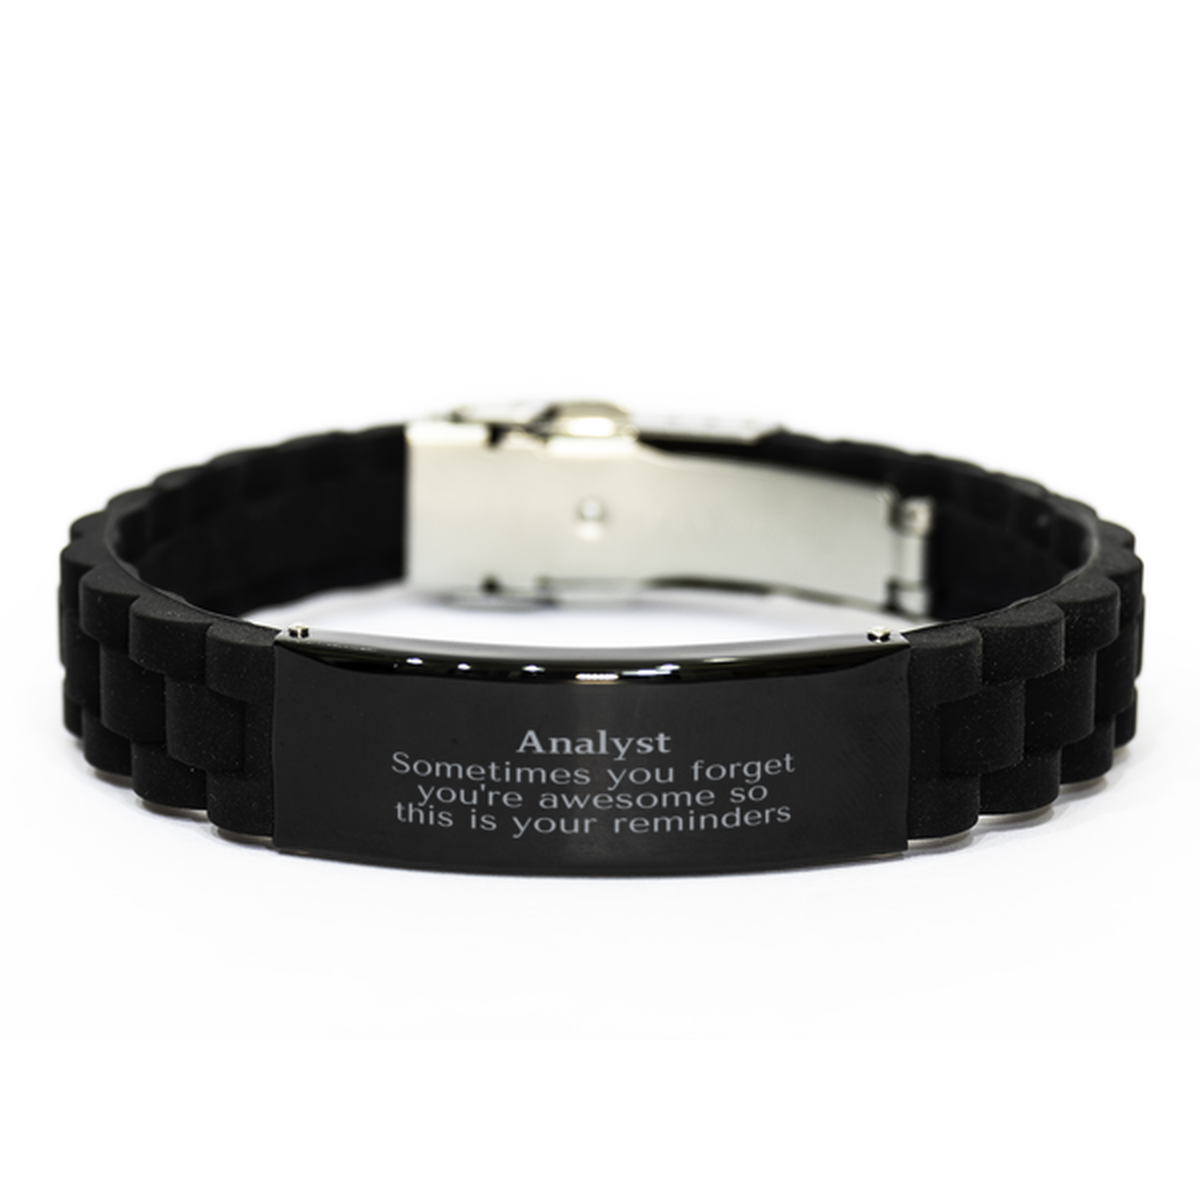 Sentimental Analyst Black Glidelock Clasp Bracelet, Analyst Sometimes you forget you're awesome so this is your reminders, Graduation Christmas Birthday Gifts for Analyst, Men, Women, Coworkers